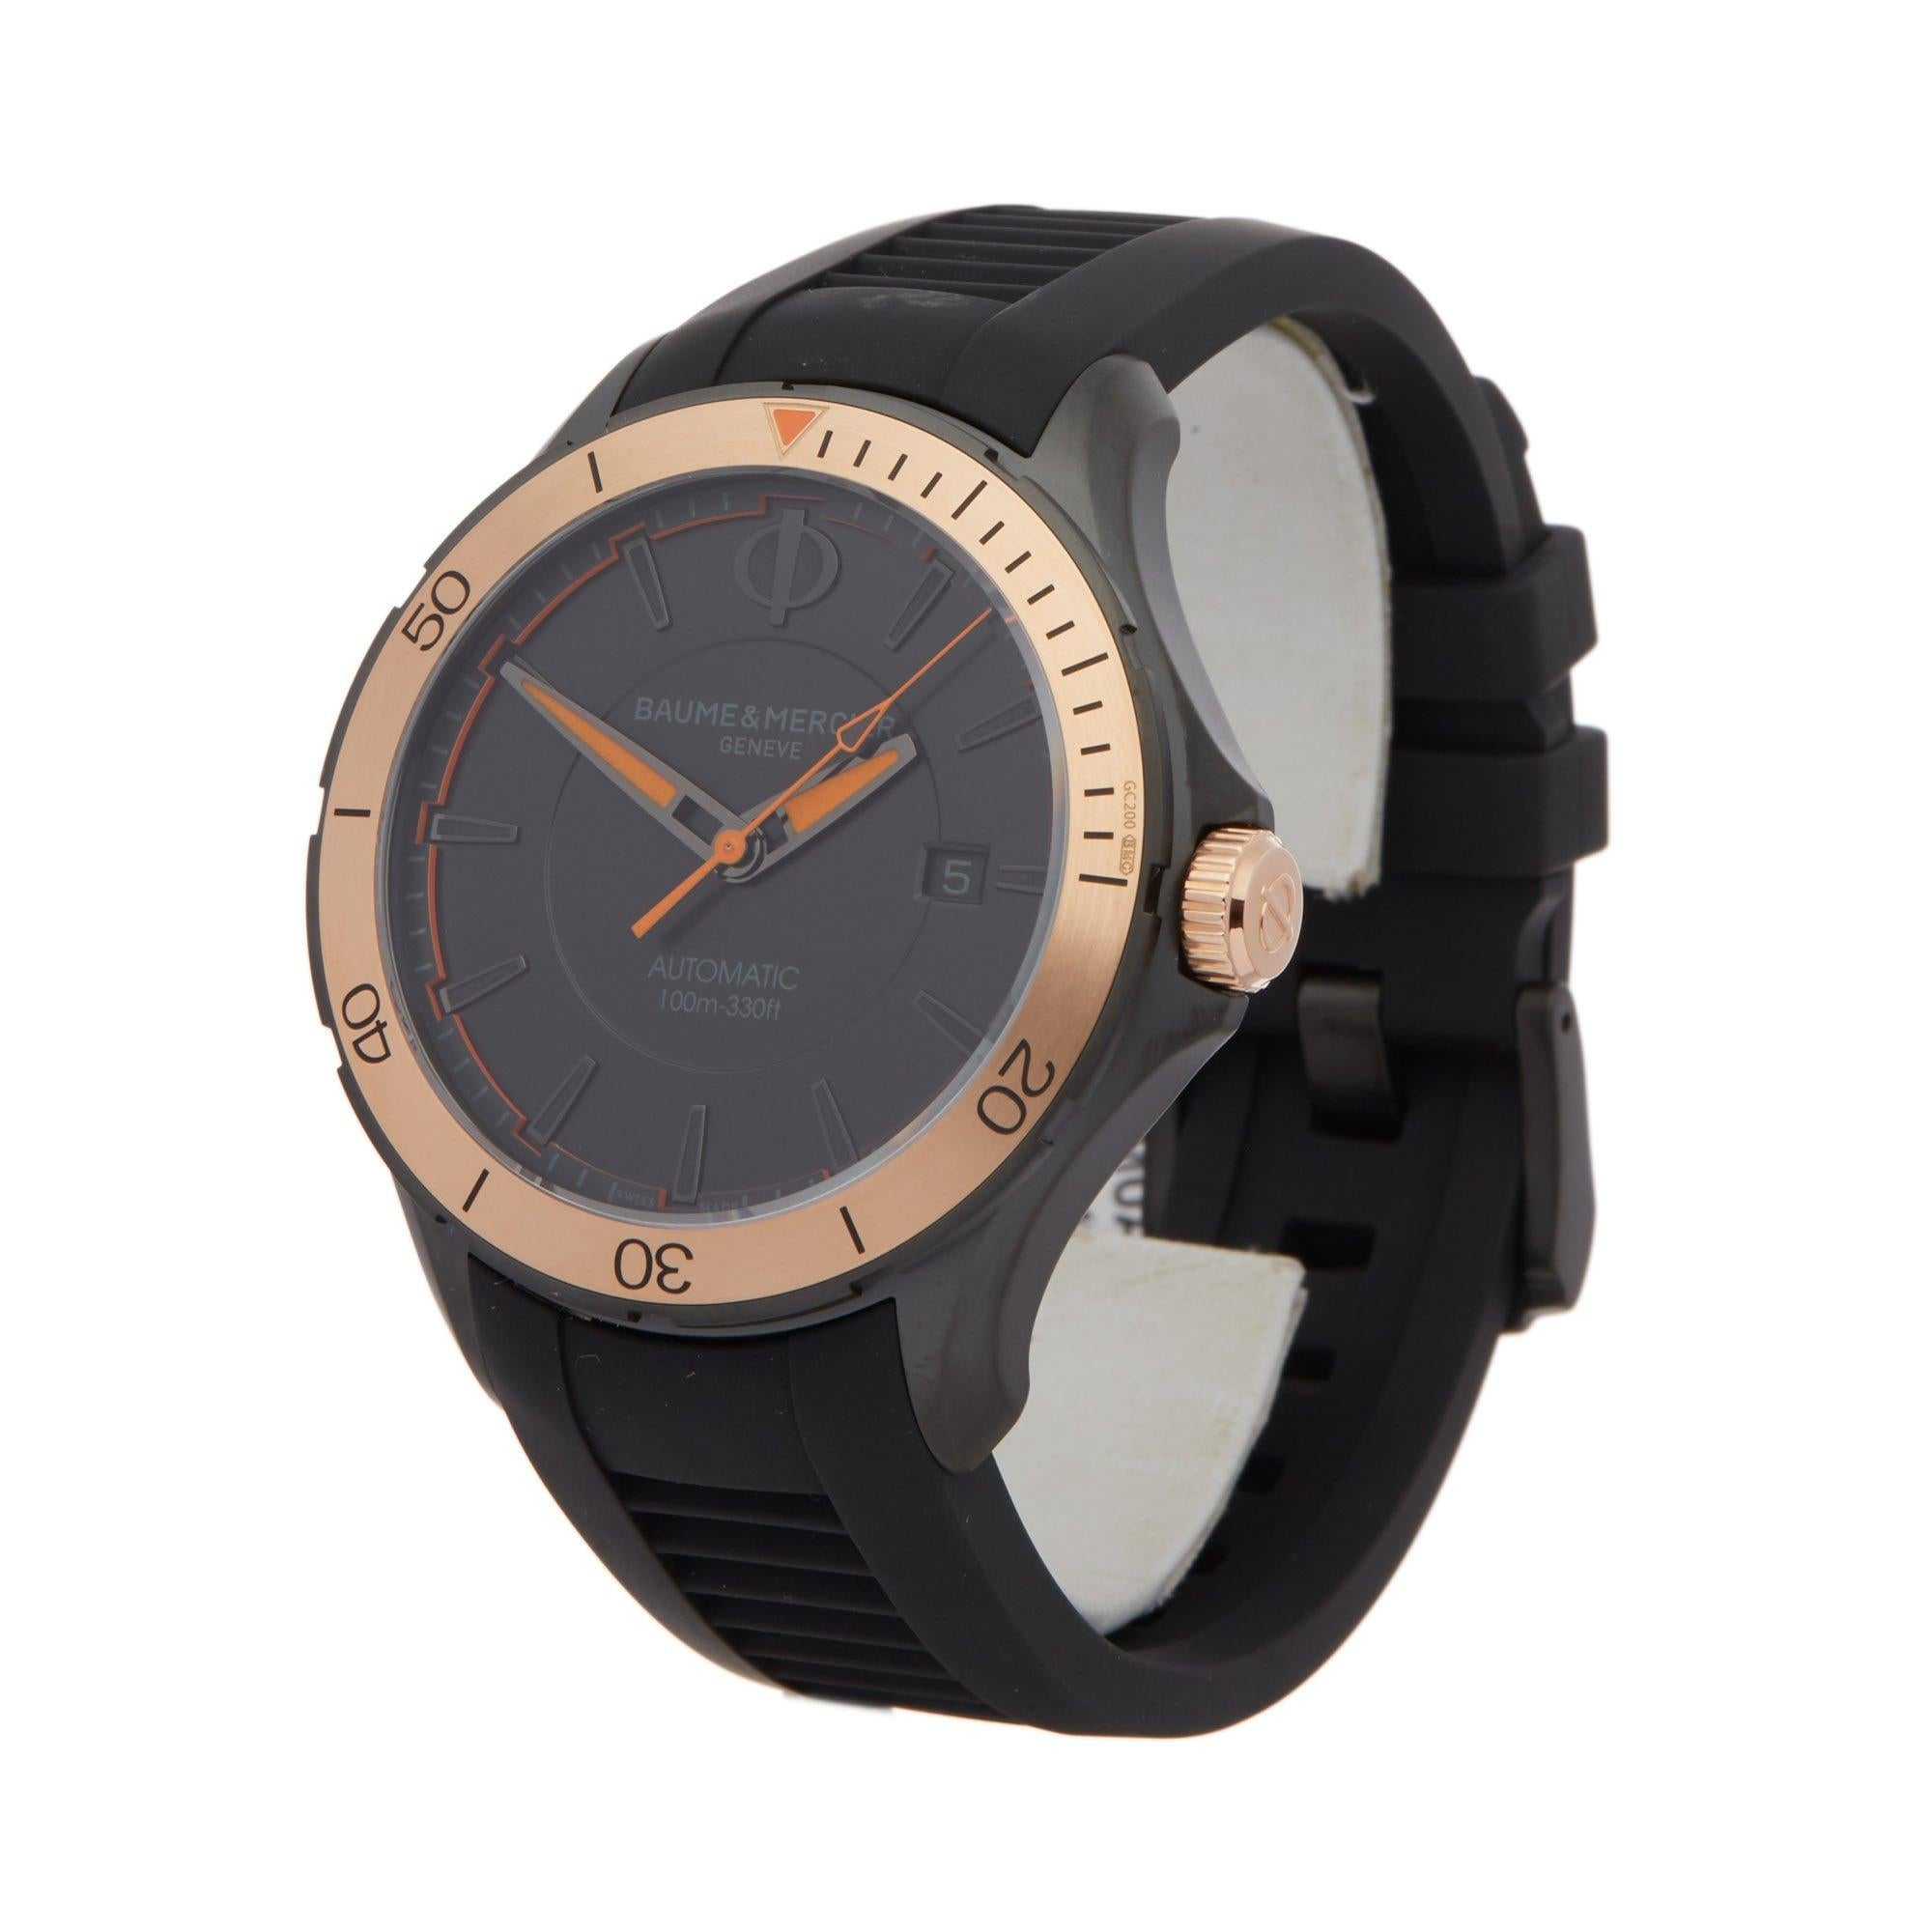 Xupes Reference: COM002531
Manufacturer: Baume & Mercier
Model: Clifton
Model Number: M0A10425
Age: 2020
Gender: Men
Complete With: Baume & Mercier Box, Manuals & Open Guarantee
Glass: Sapphire Crystal
Case Material: Stainless Steel
Strap Material: